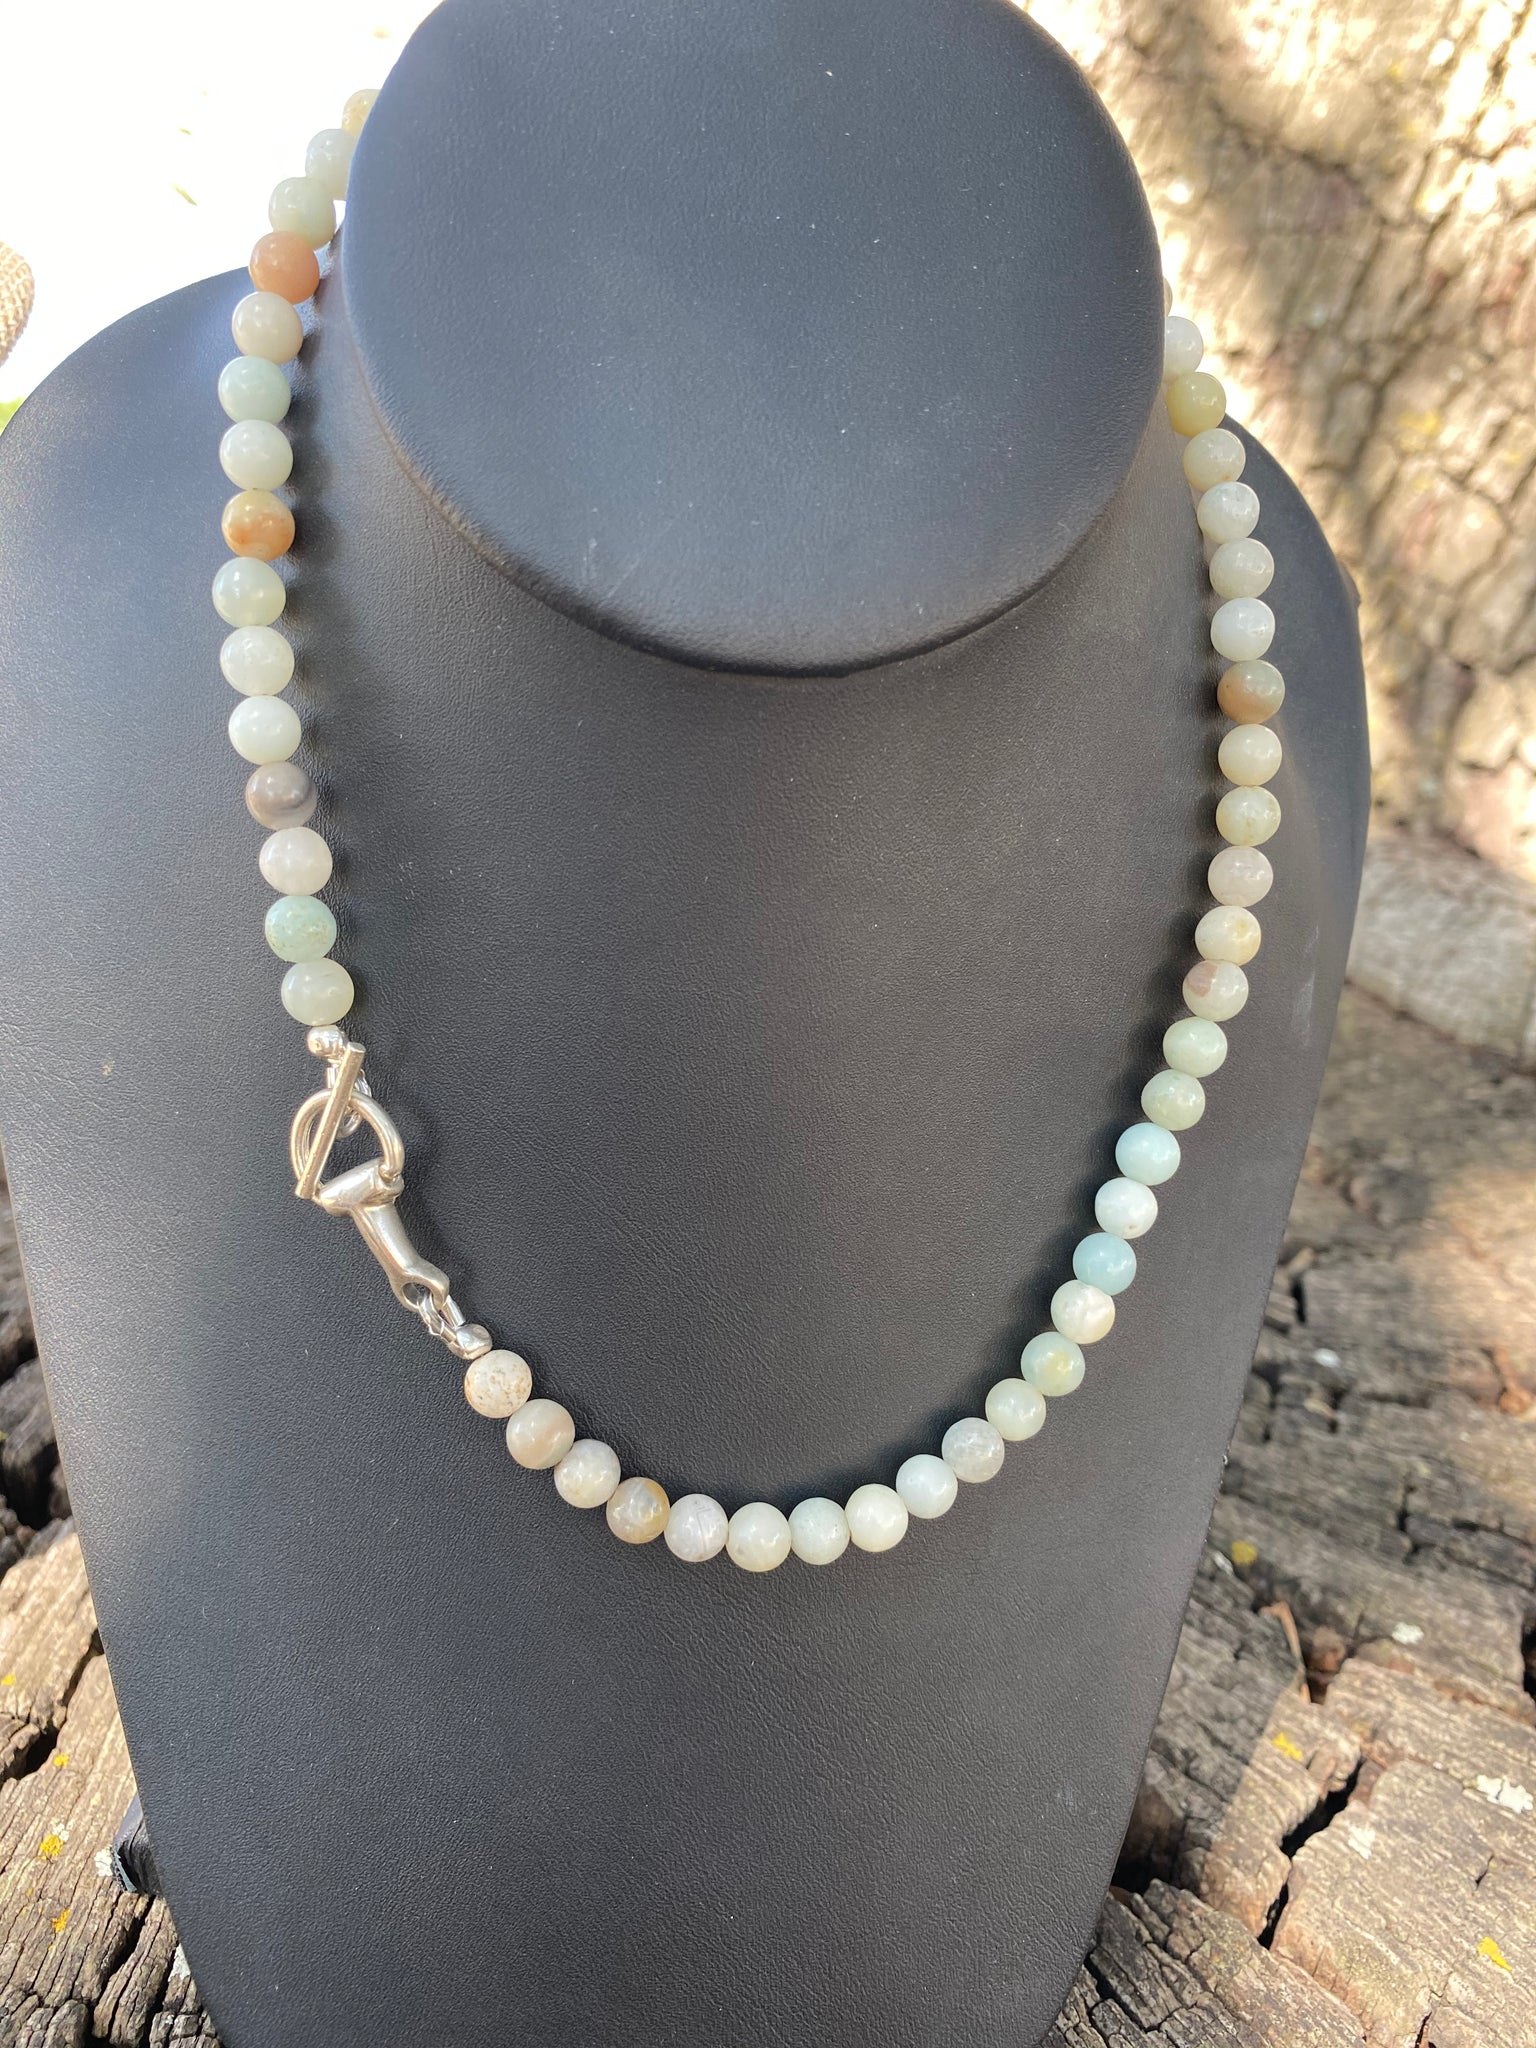 TJP Amazonite necklace with Half Bit Fitting Clasp